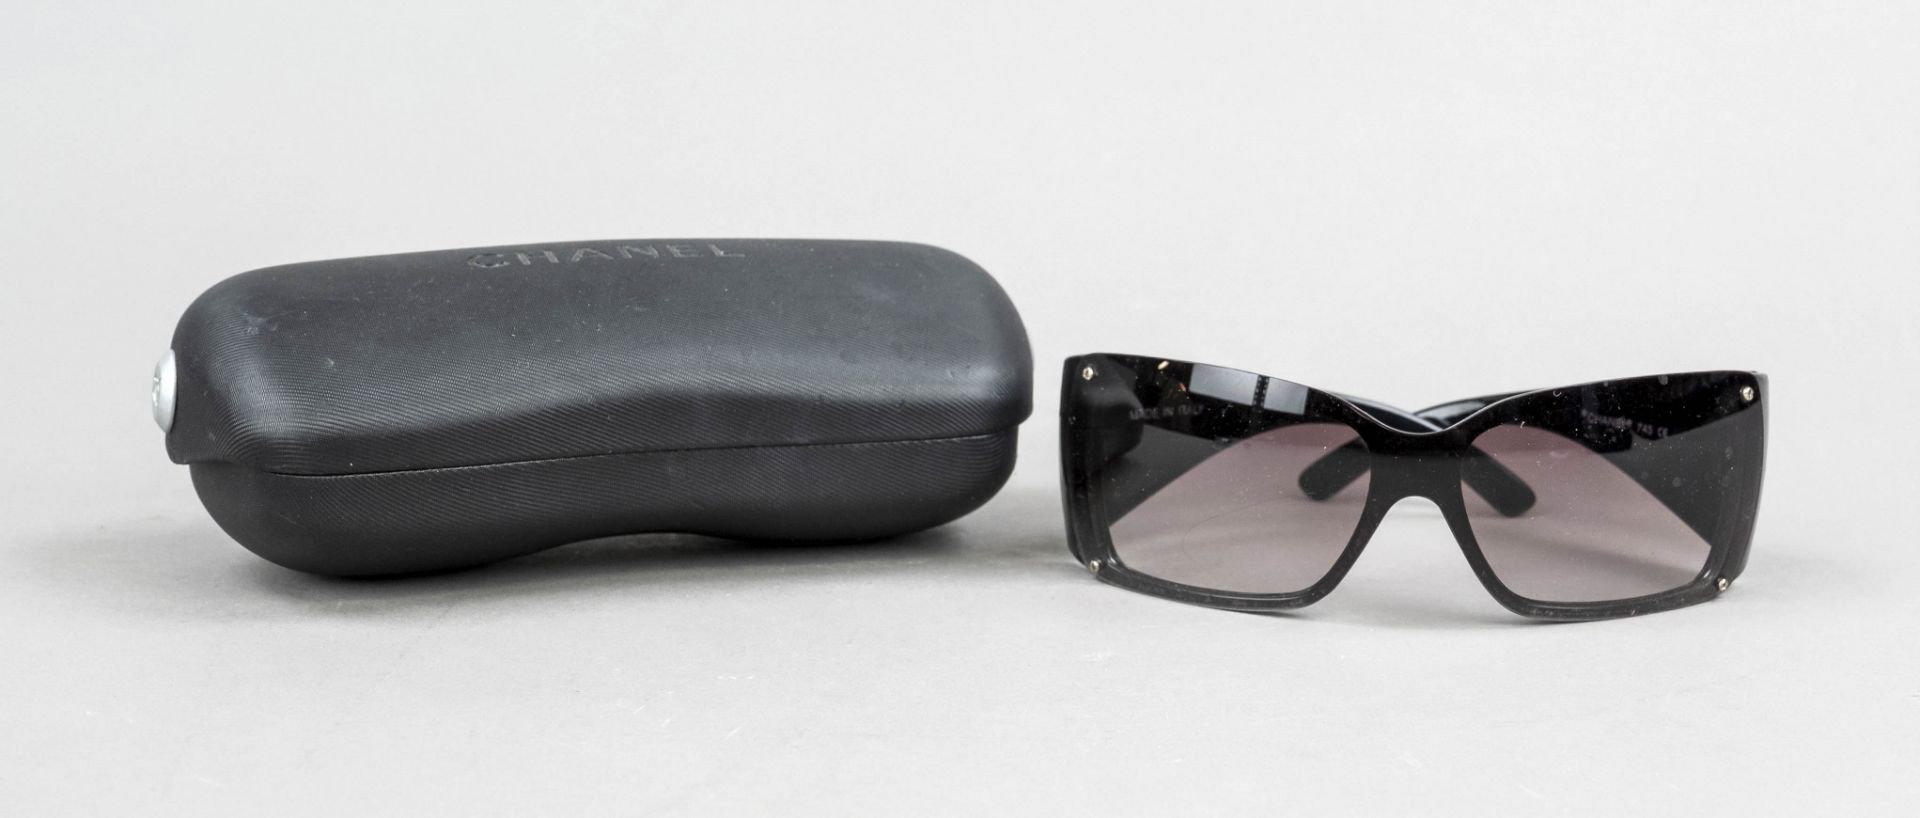 Chanel, sunglasses, black plastic frame with wide temples and logo applied to the side, brown tinted